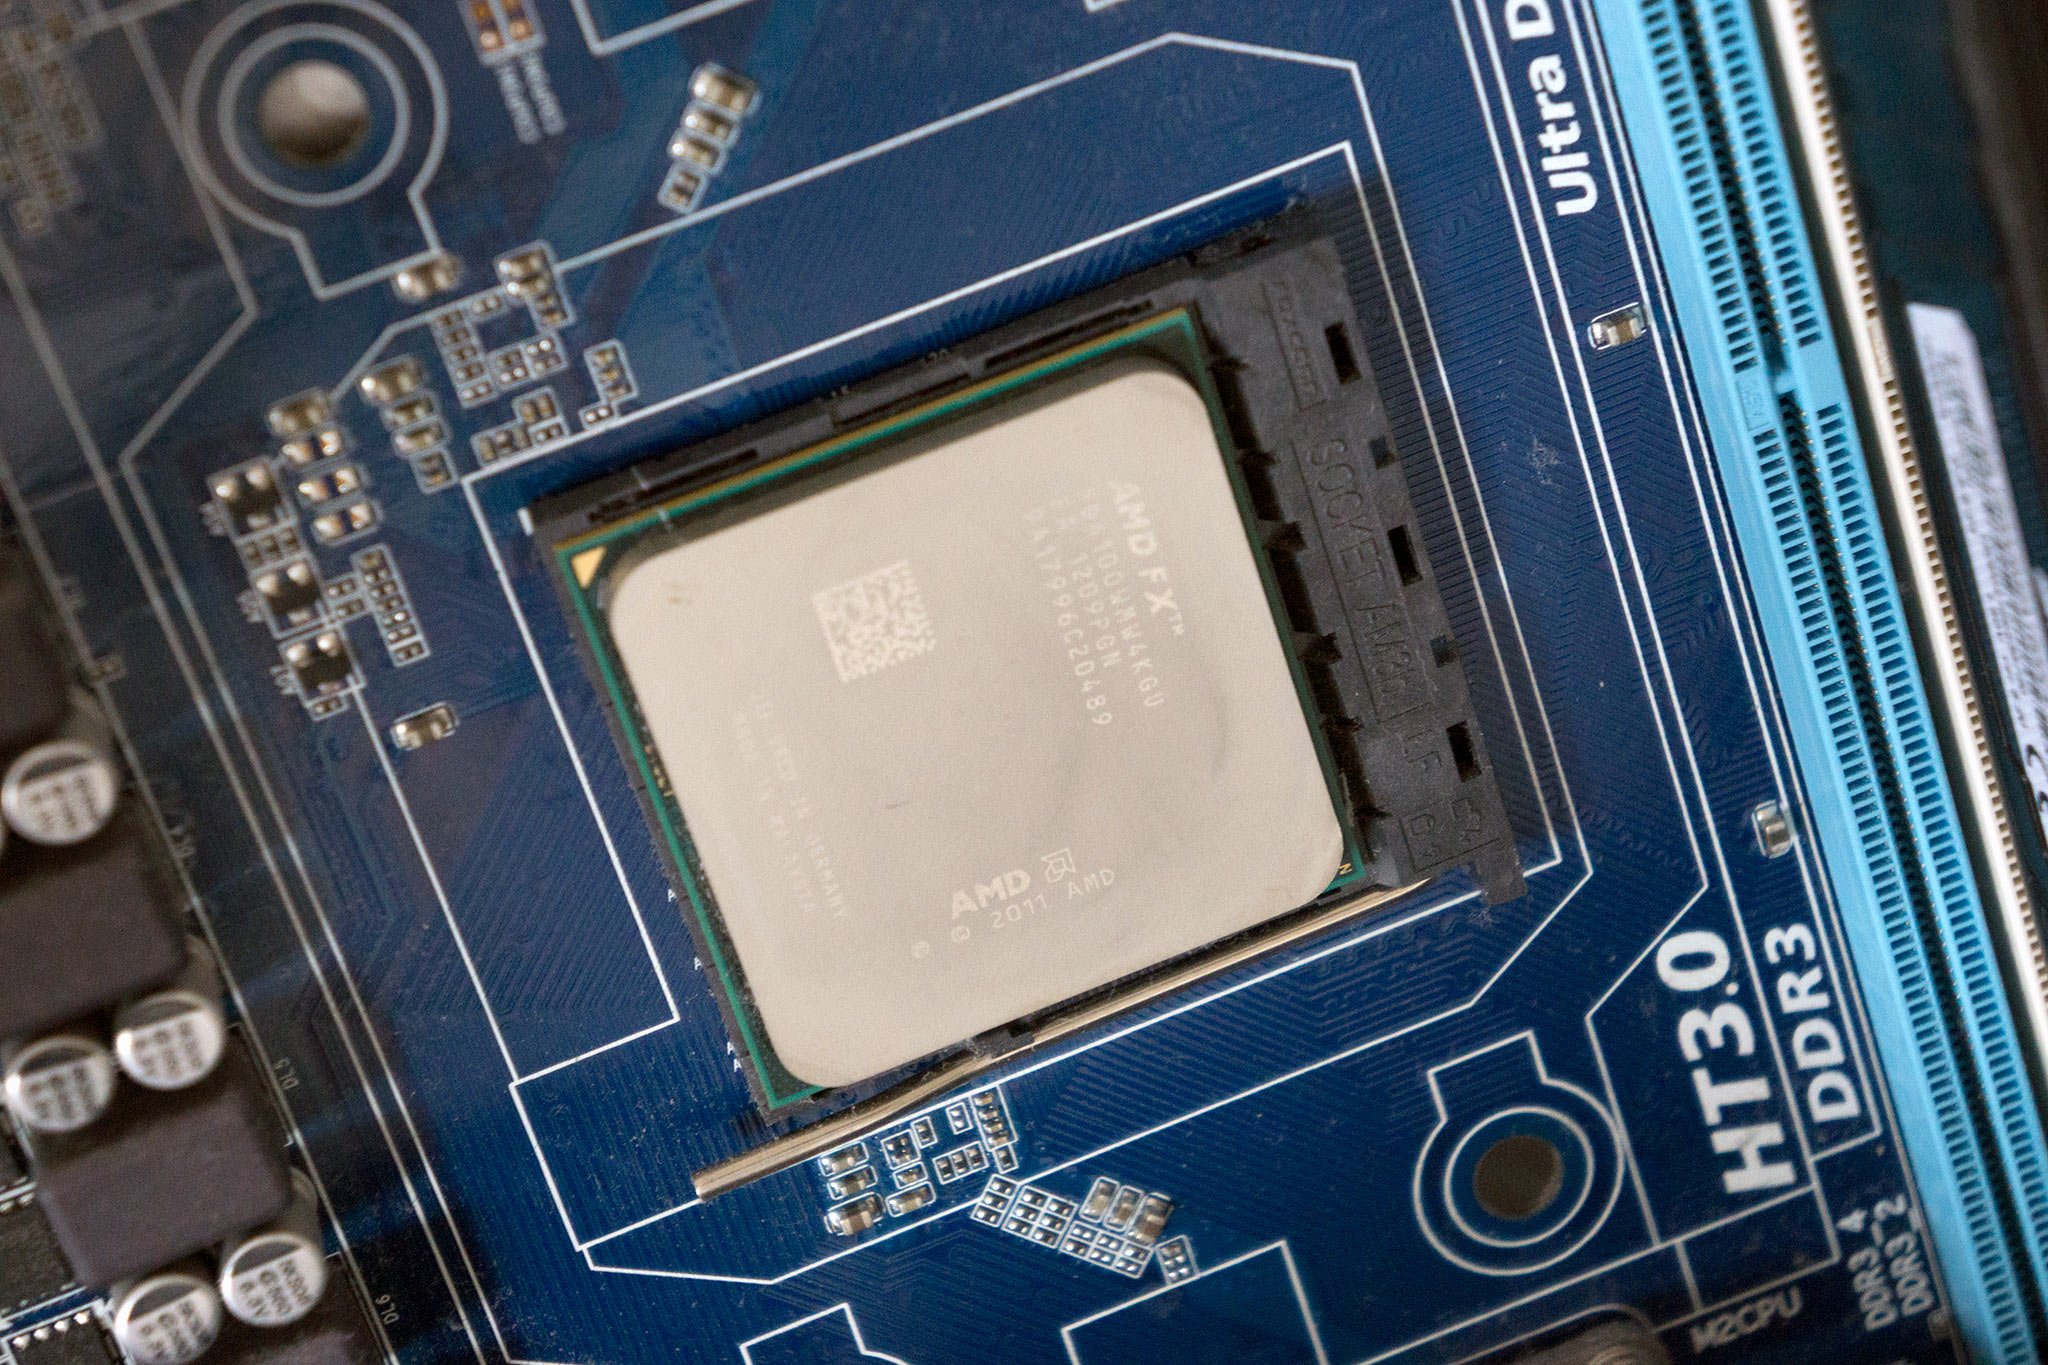 Chime in: Do you prefer AMD or Intel for your CPU? AMD or NVIDIA for